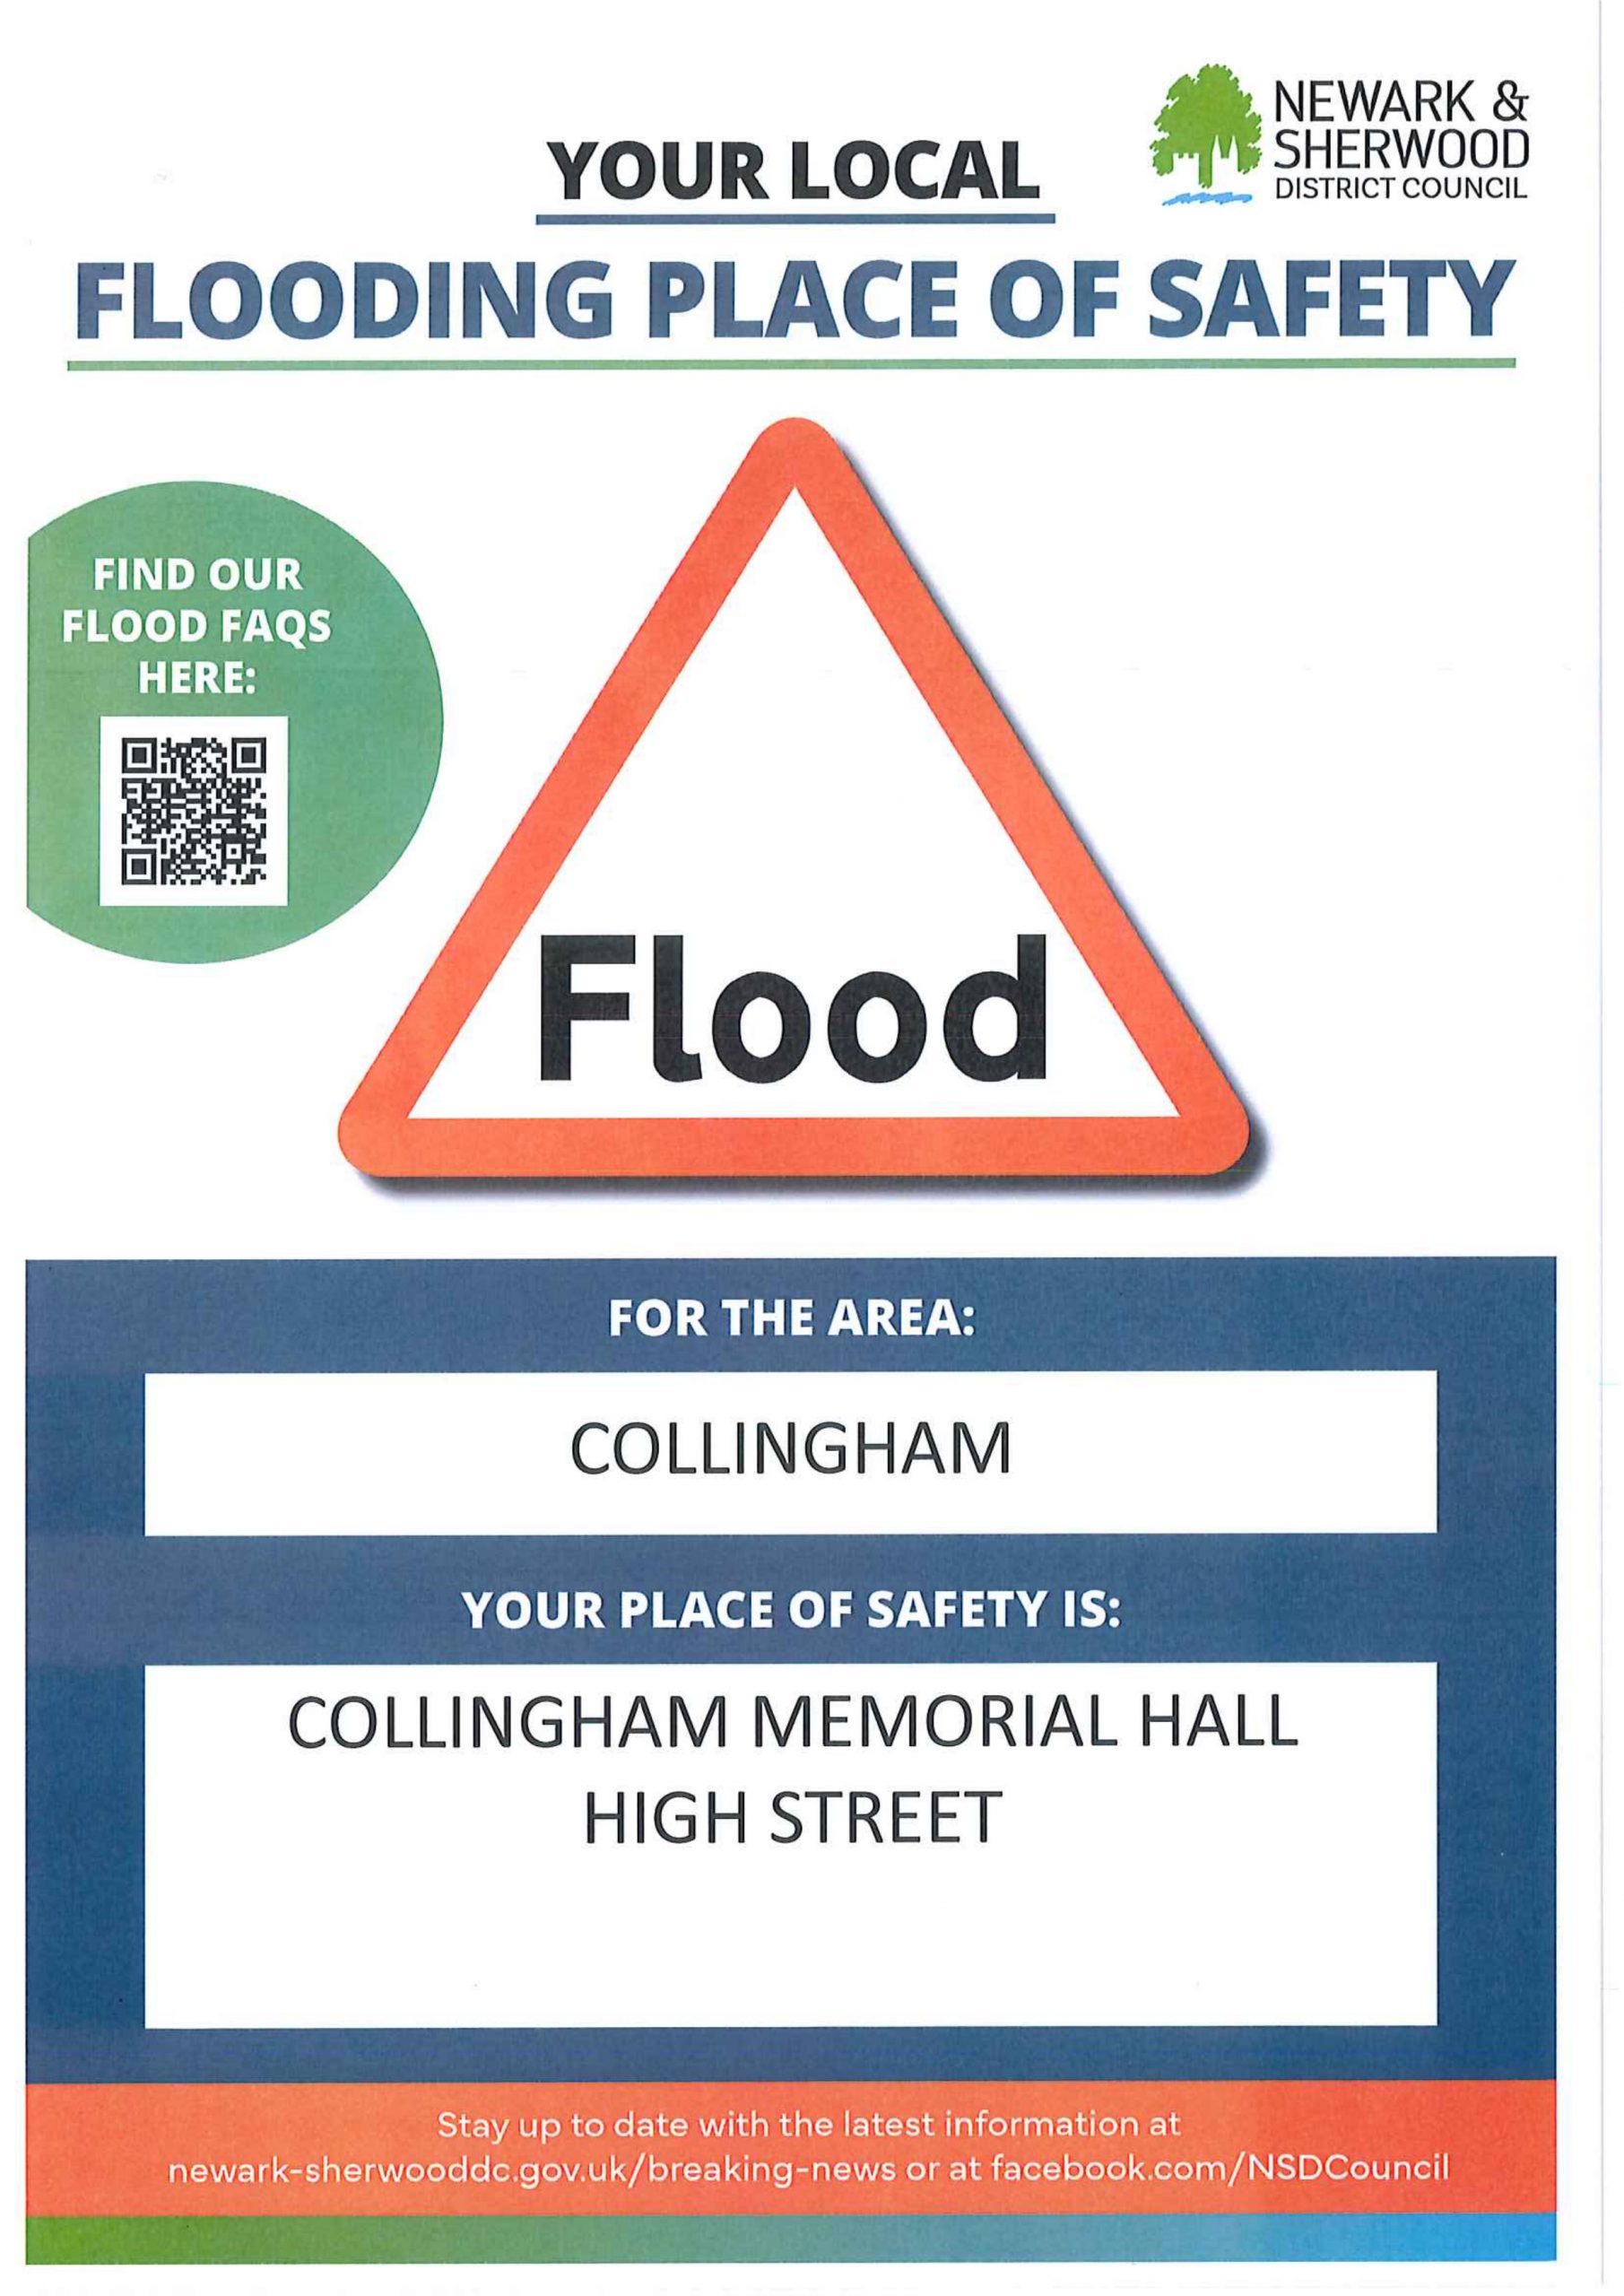 Your local place of safety in the event of your property becoming flooded is the Memorial Hall, Hight Street, Collingham